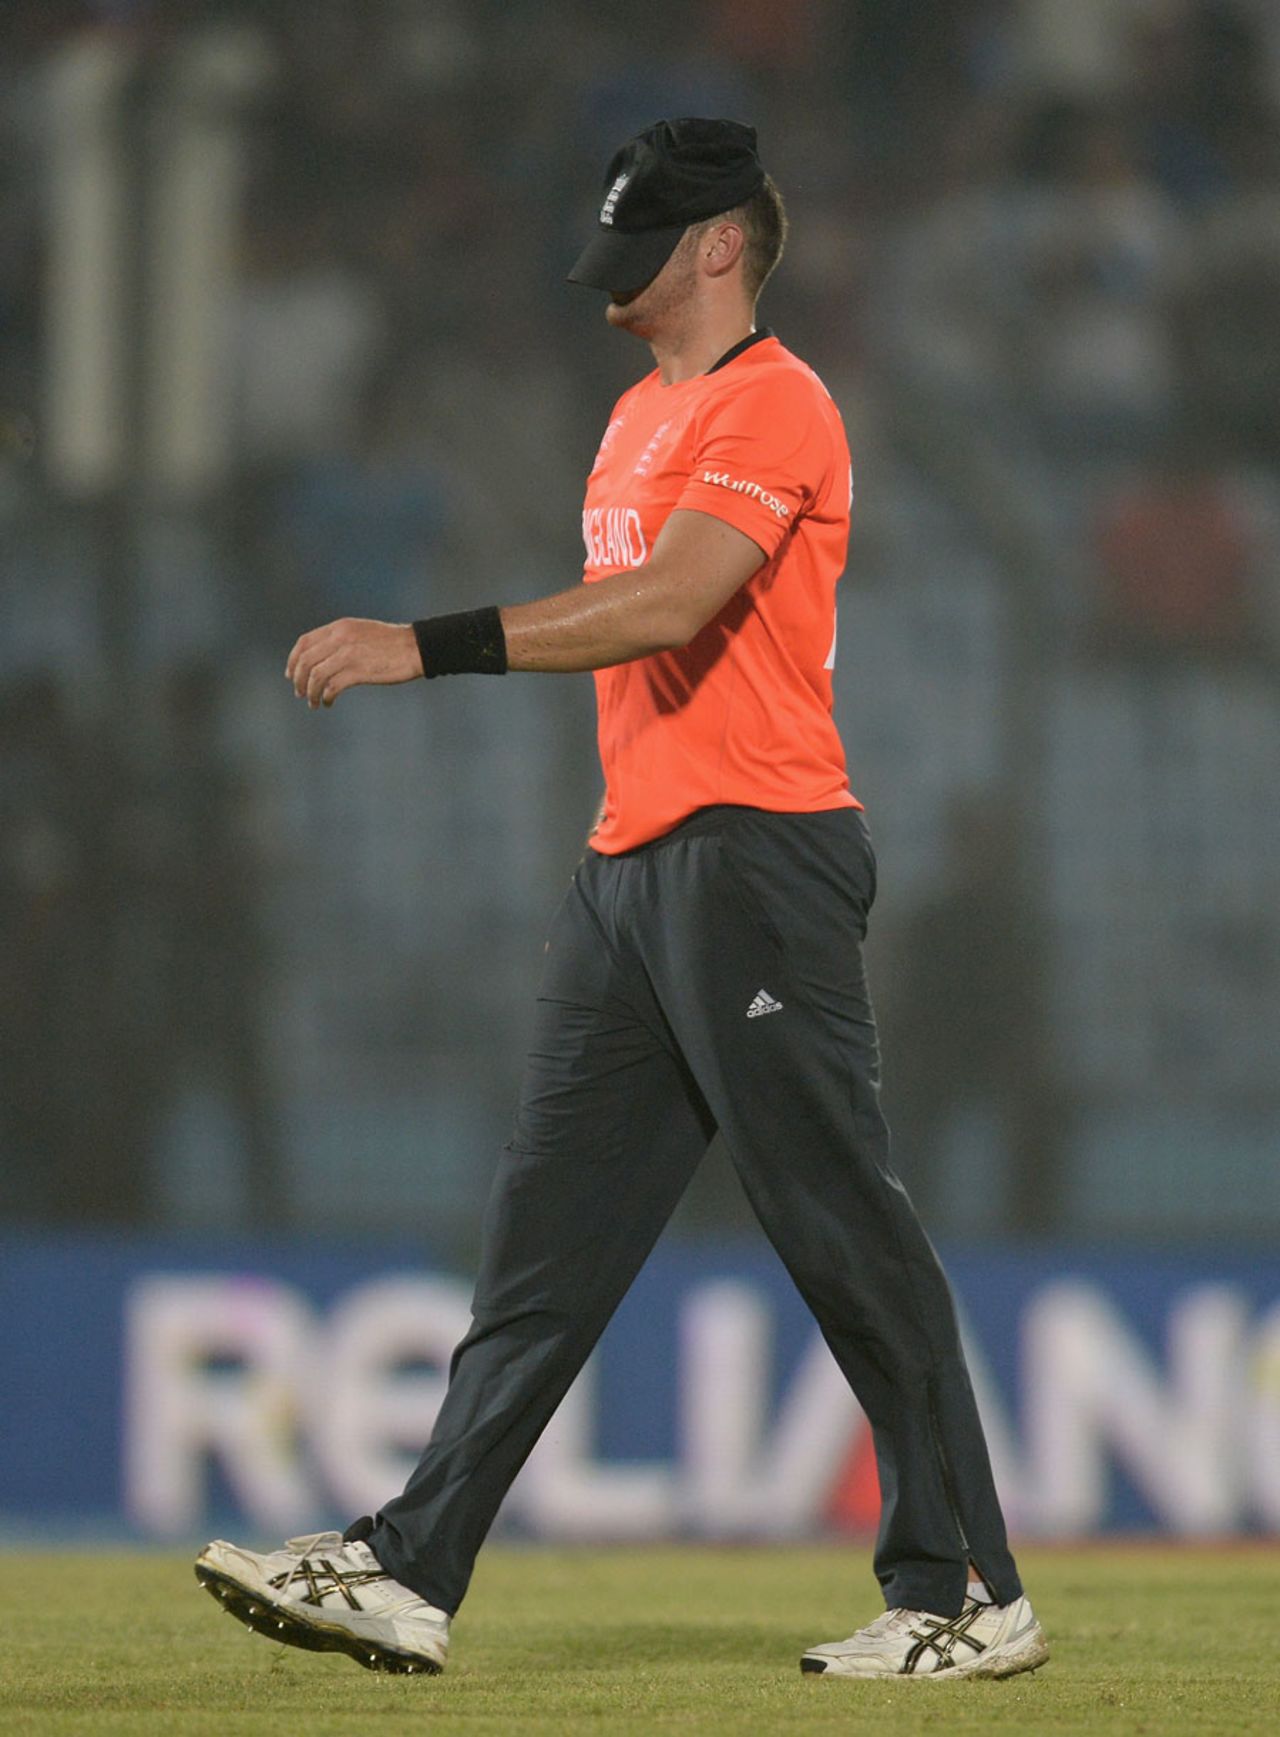 Tim Bresnan's four overs cost 48, England v Sri Lanka, World T20, Group 1, Chittagong, March, 27, 2014